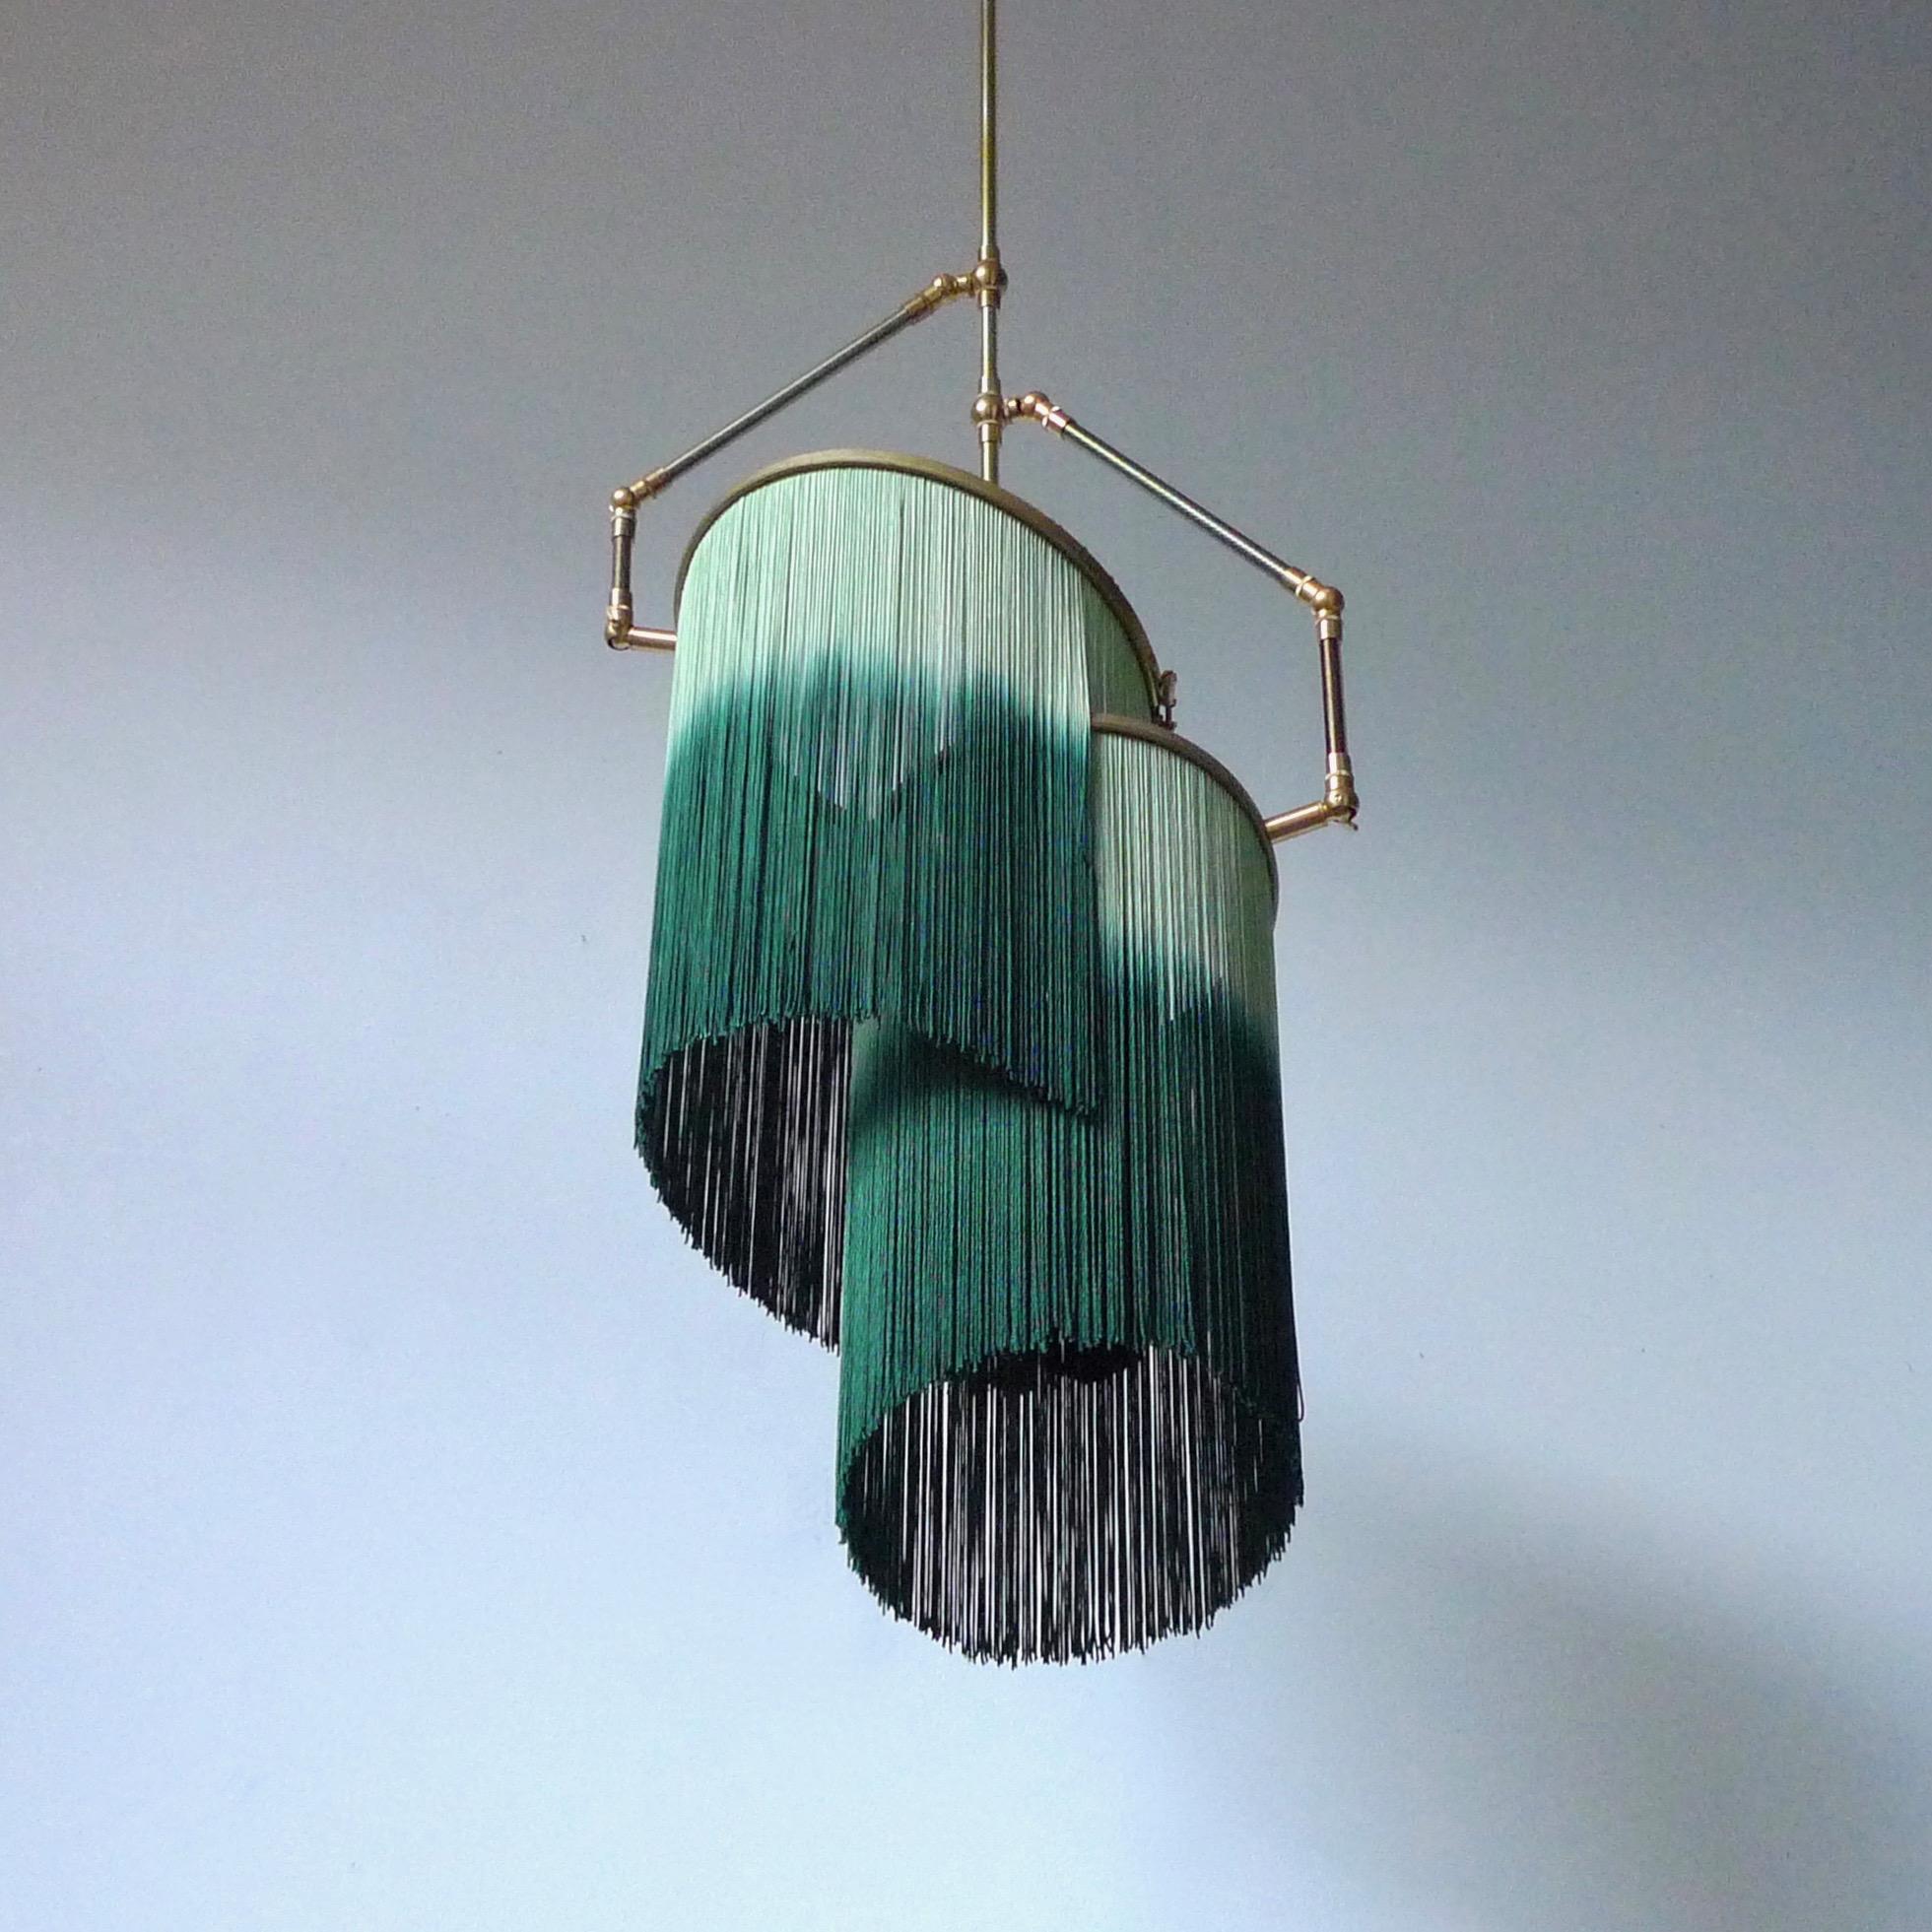 Green charme pendant lamp, Sander Bottinga.

Dimensions: H 65 (can be customized) x W 38 x D 25 cm.
Hand sculpted in brass, leather, wood and dip dyed colored fringes in viscose.
The movable arms makes it possible to move the circles with